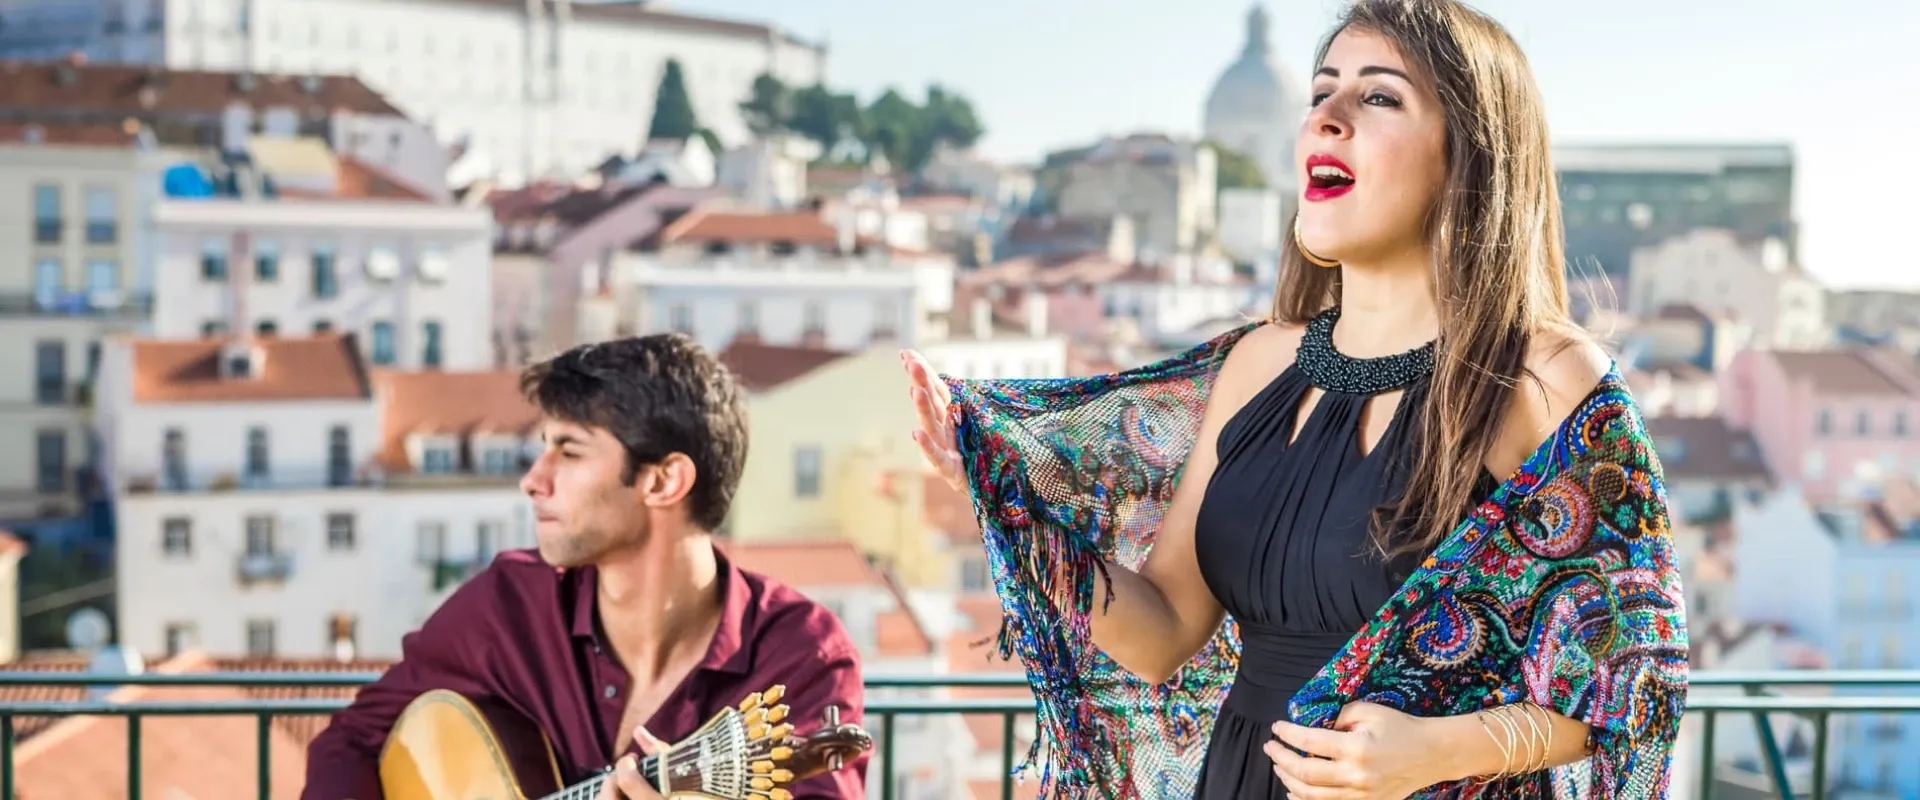 A woman sings fado and a man plays the guitarra on a rooftop in Lisbon